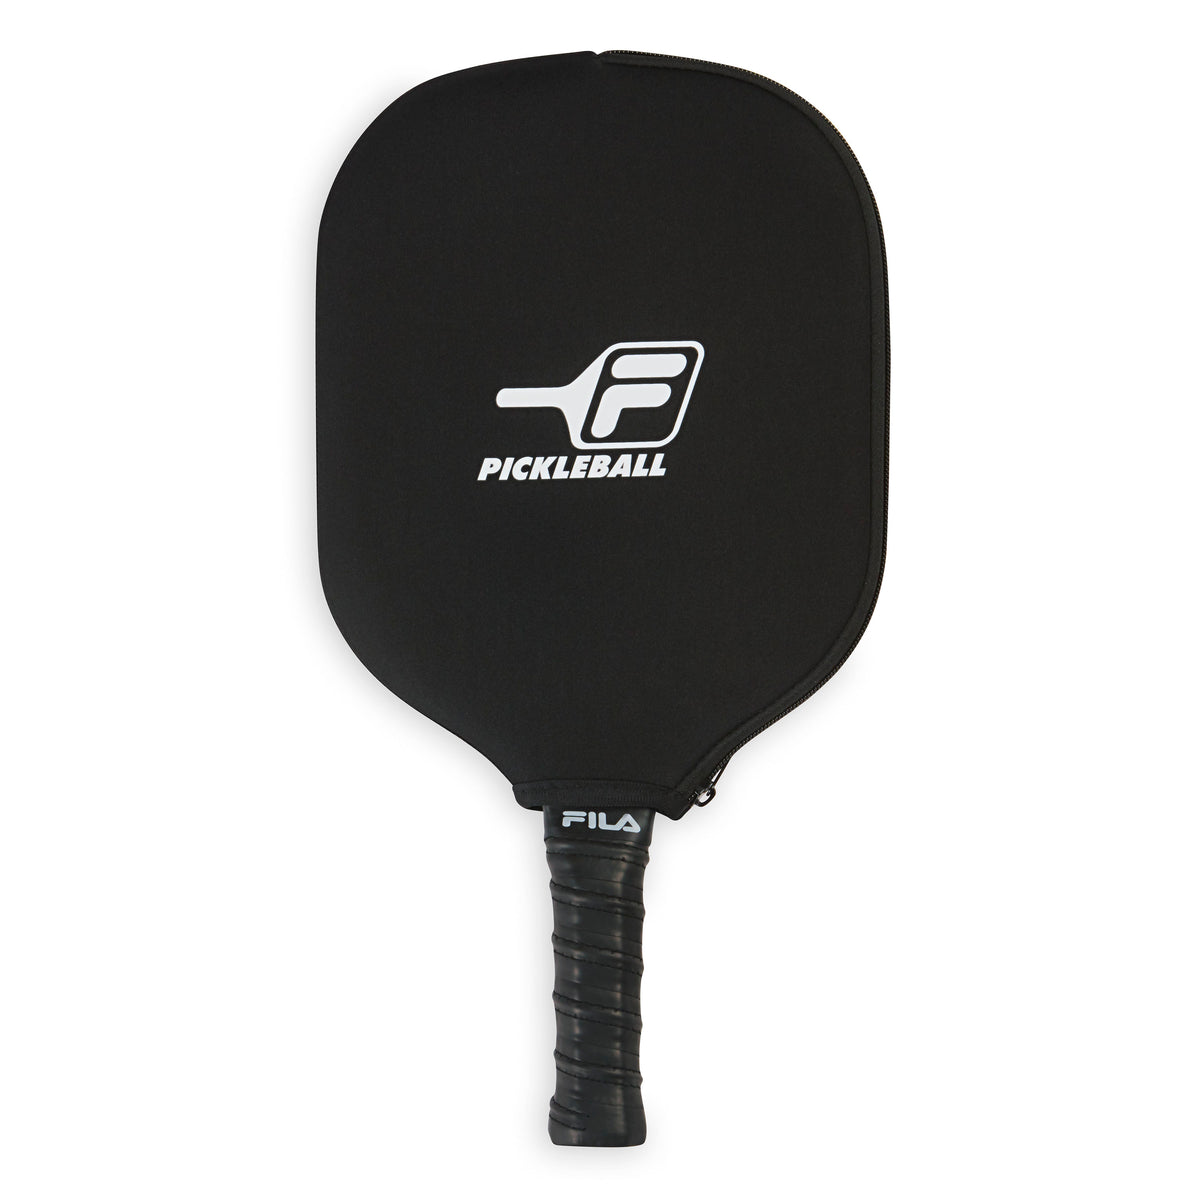 FILA Pickleball Paddle Cover with paddle